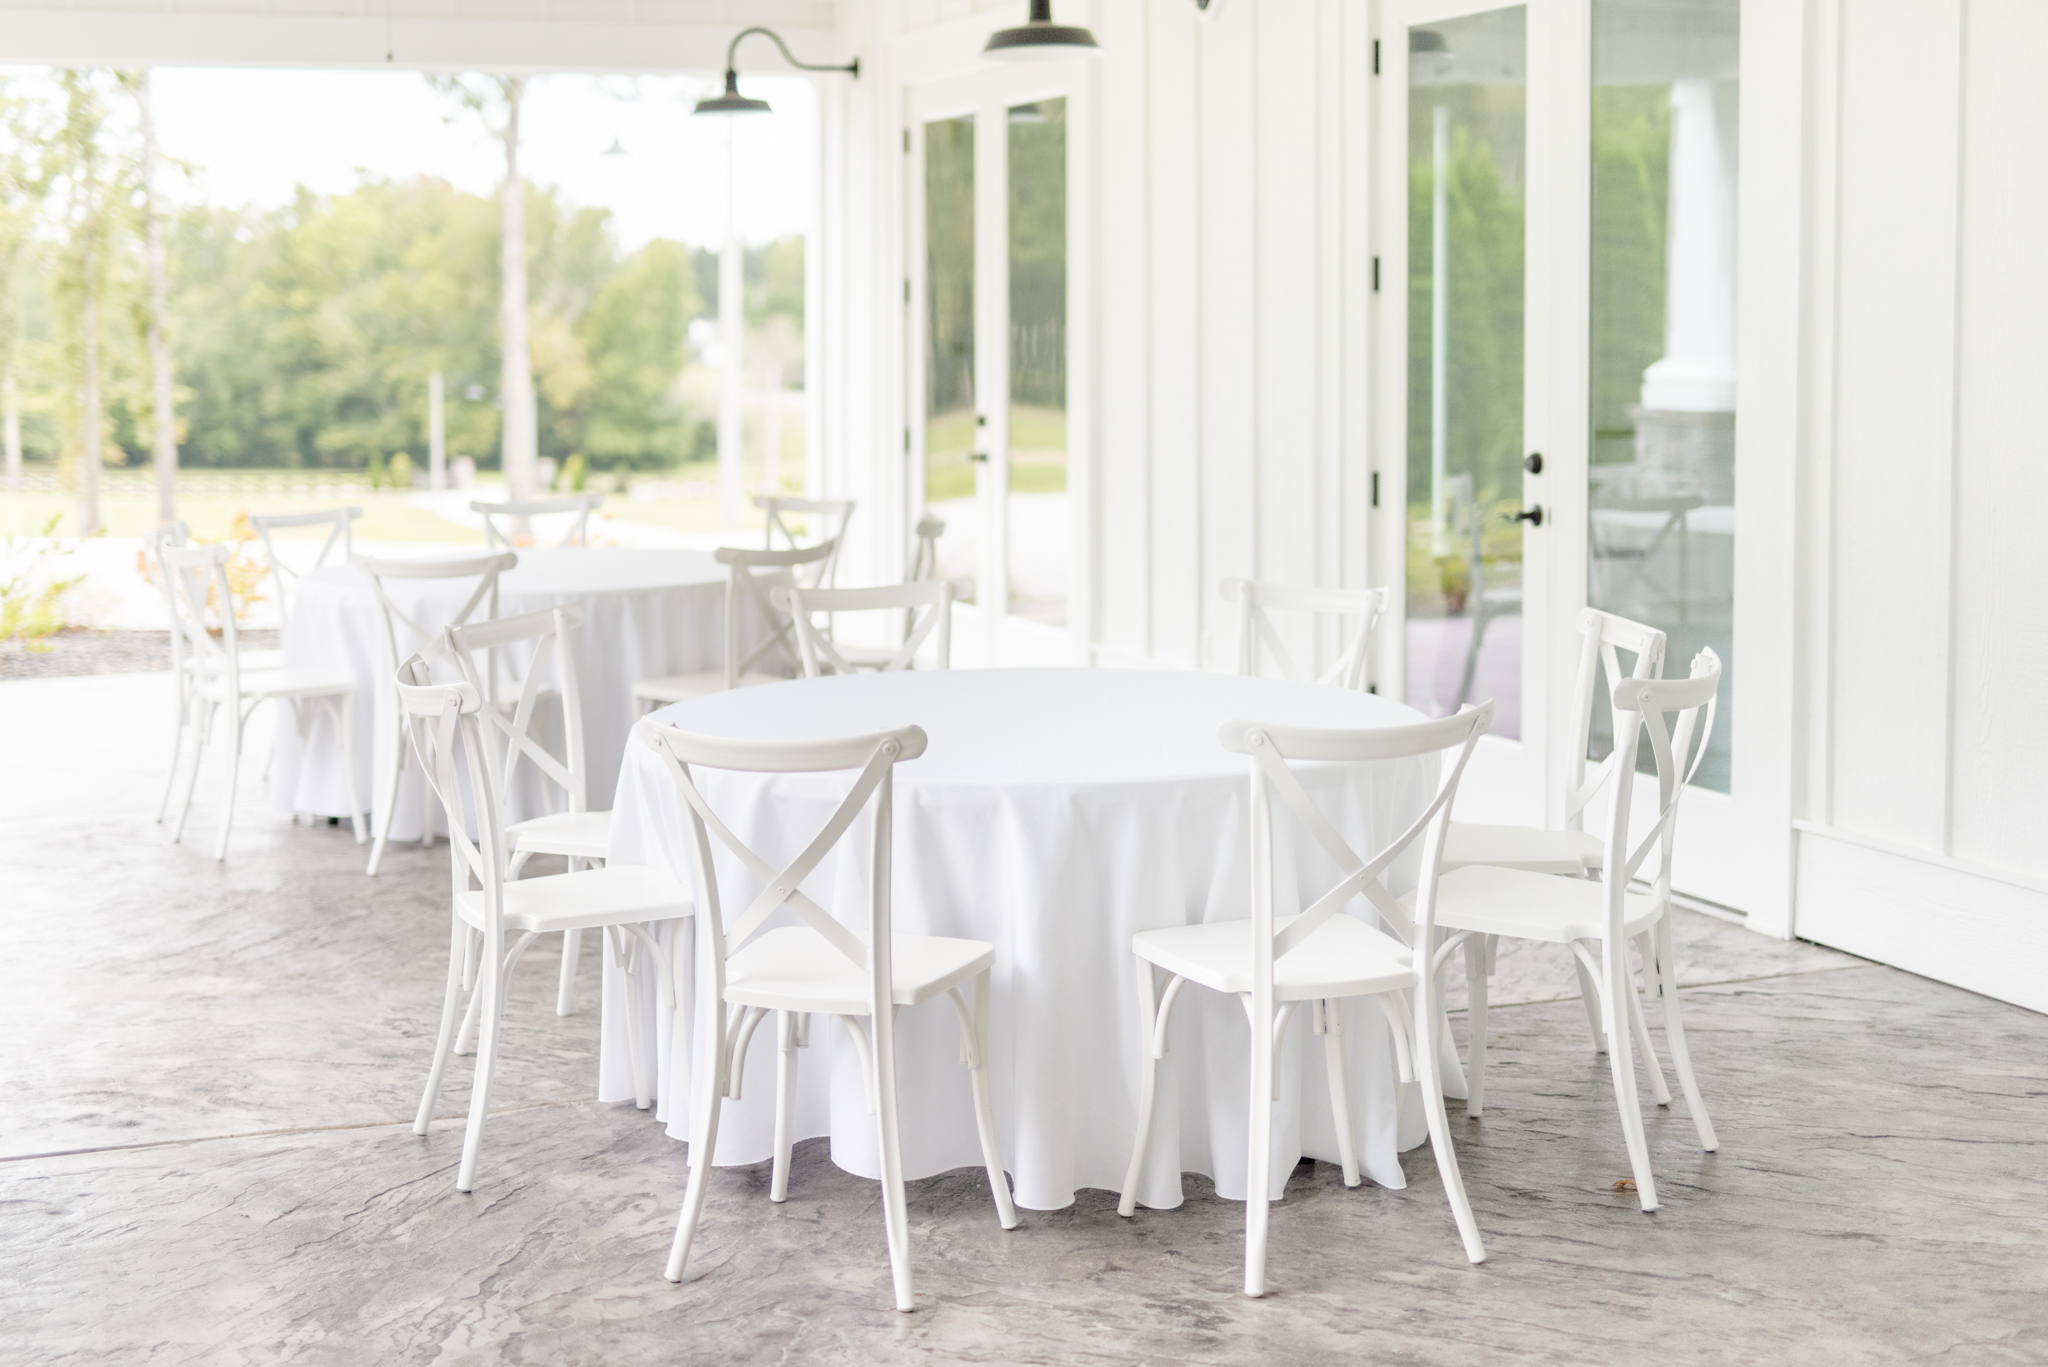 White table and chairs in reception area.